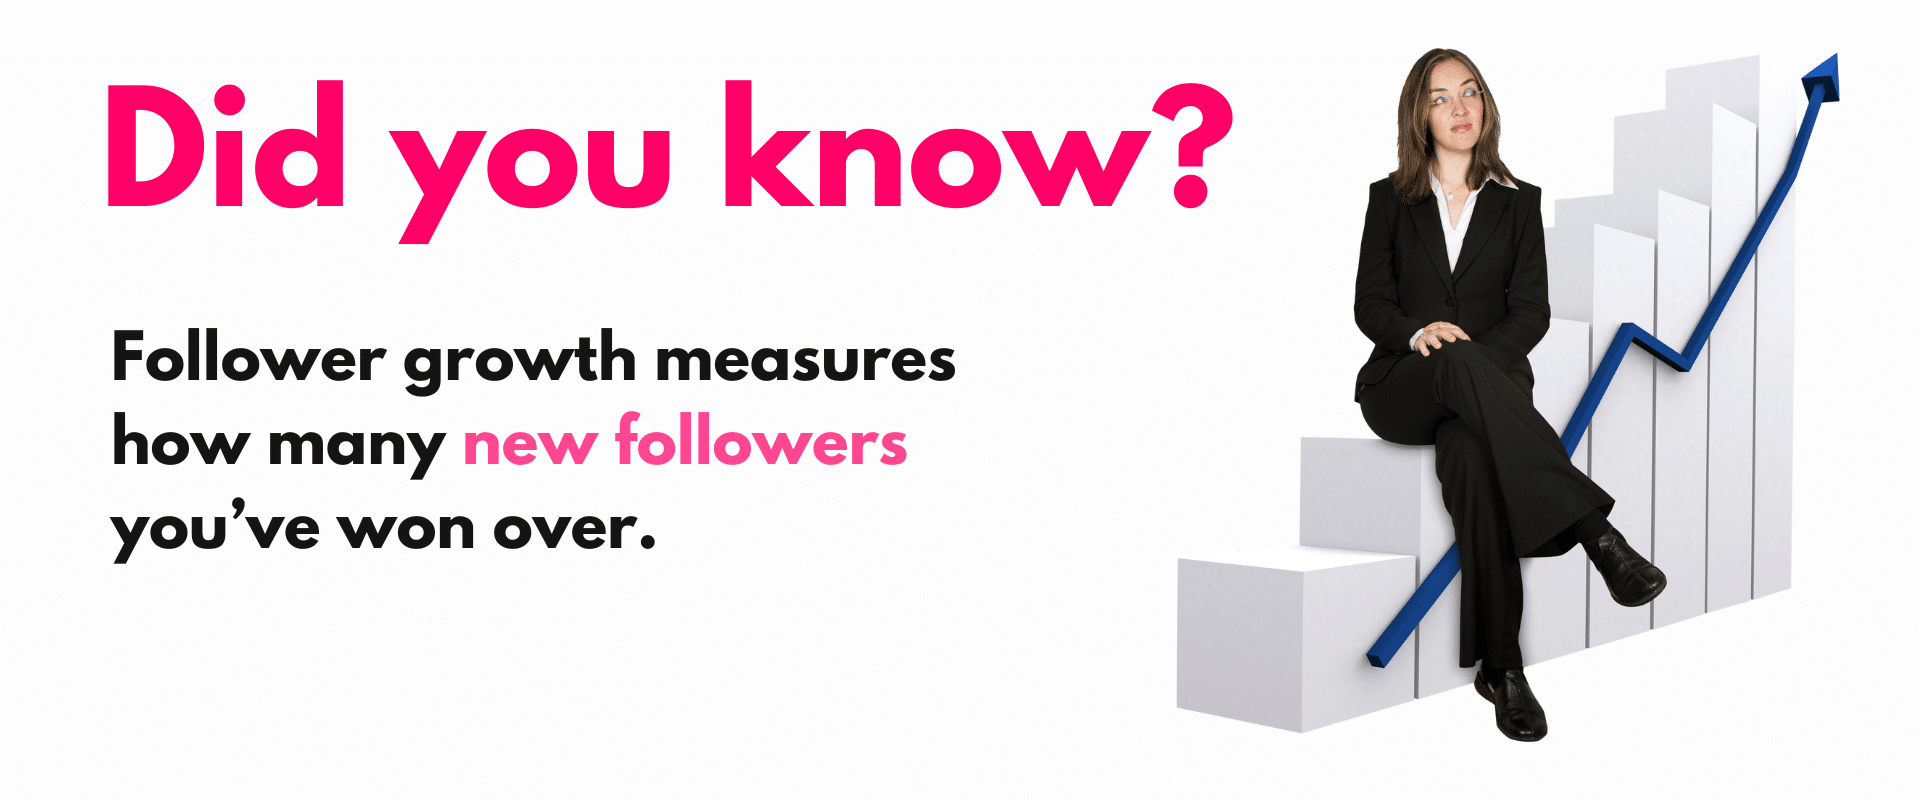 Did you know? follower growth measures how many new followers you have.